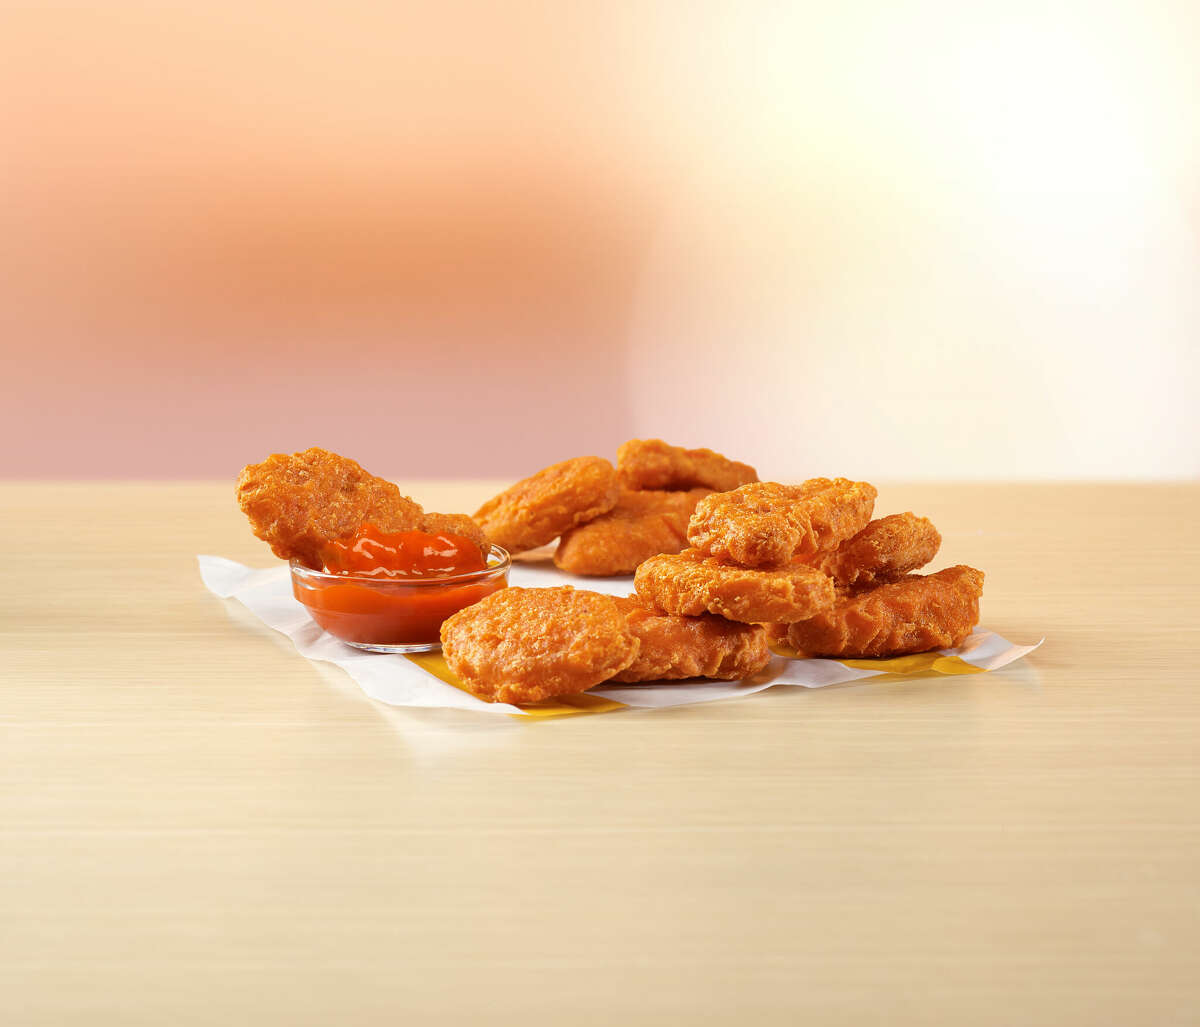 Spicy McNuggets from back Antonio stores